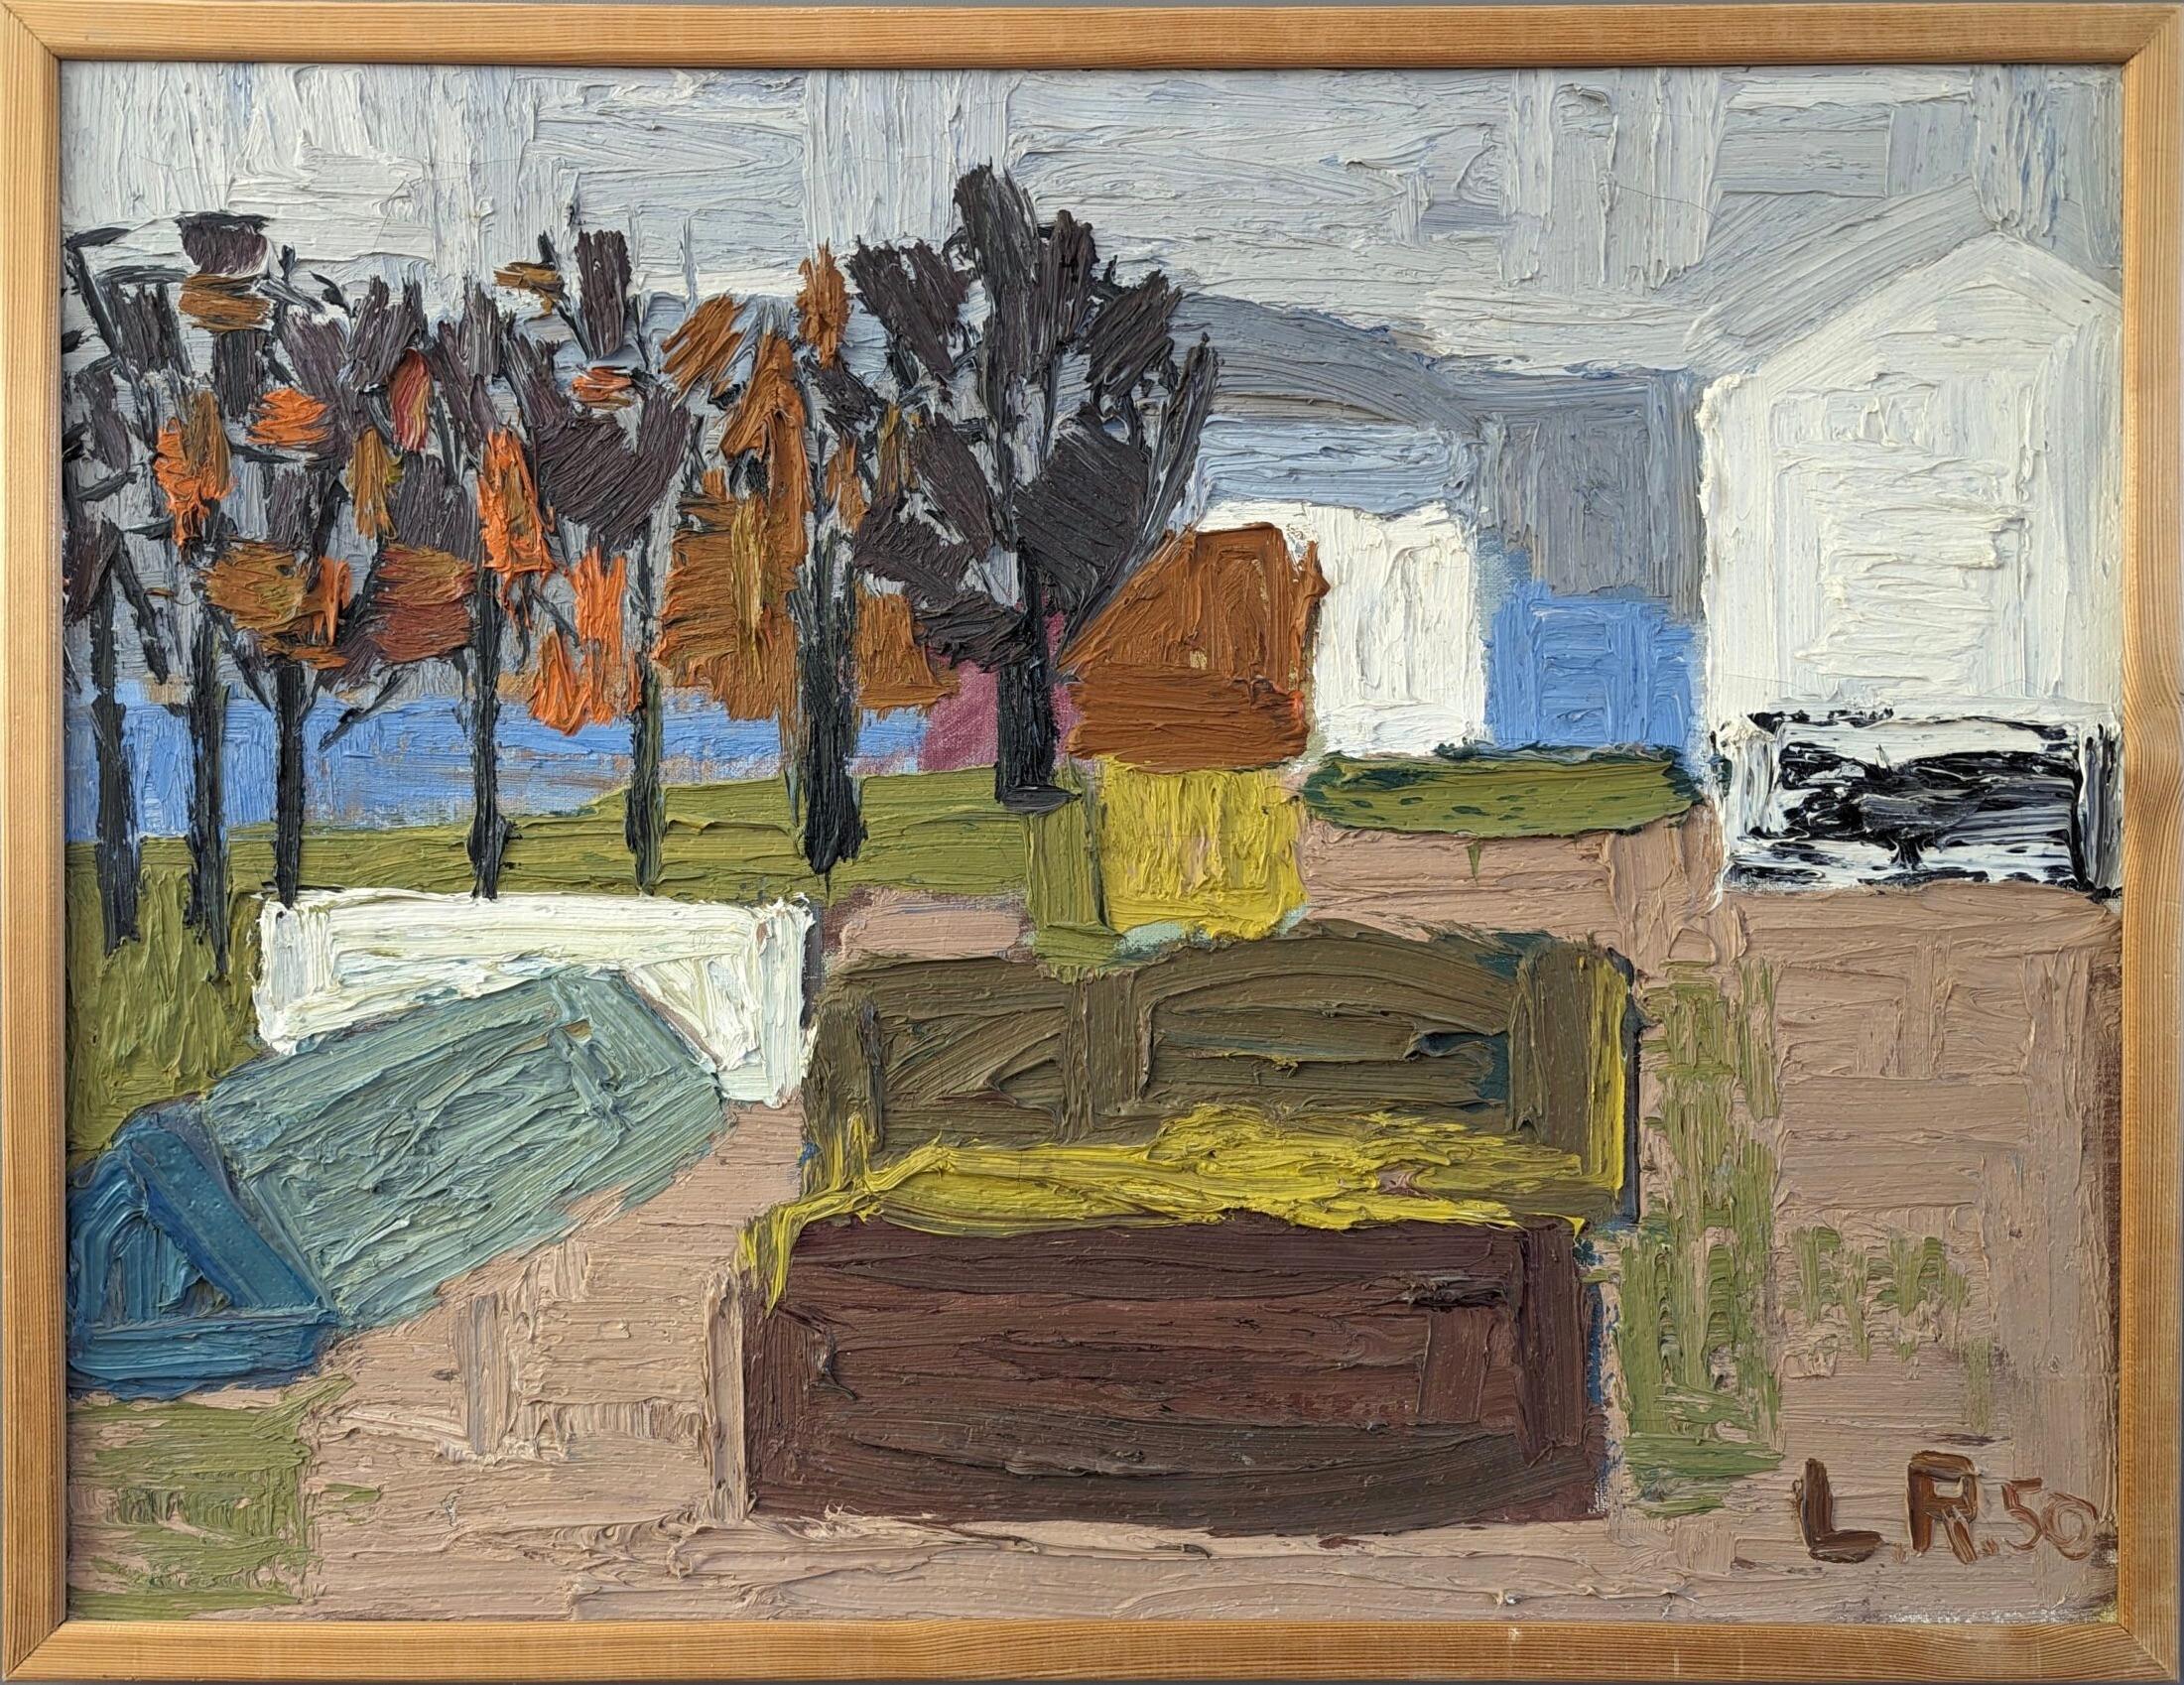 Unknown Abstract Painting - 1950 Vintage Mid-Century Swedish Abstract Landscape Oil Painting - Garden Plot